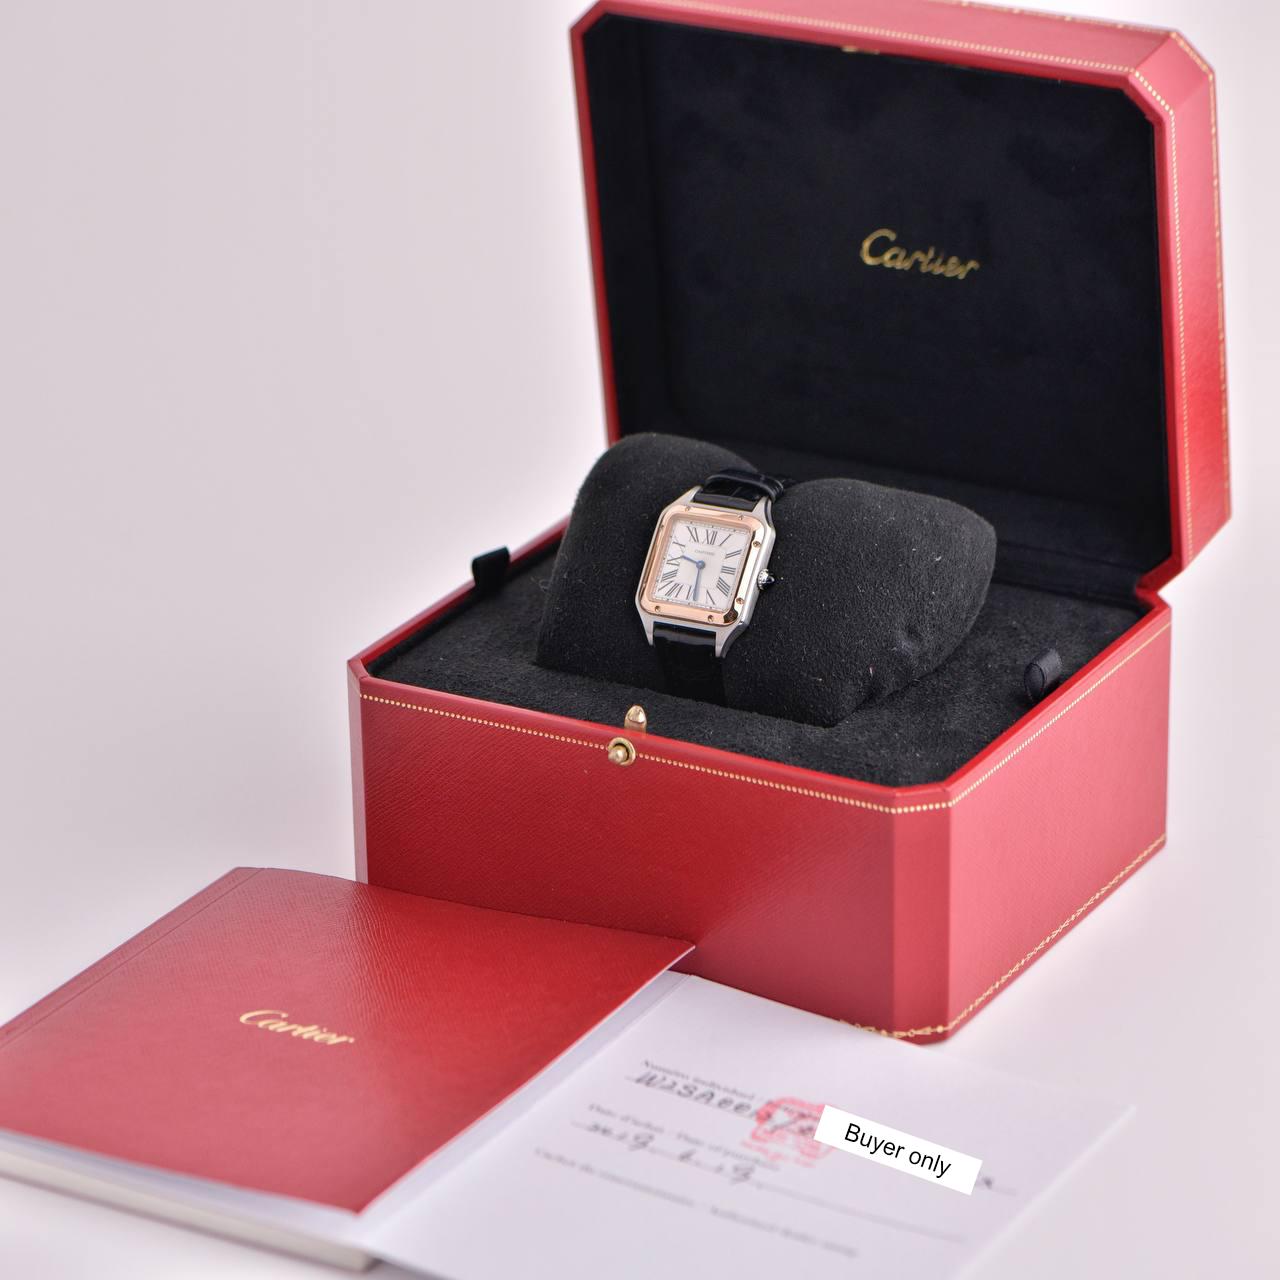 SKU AT-1816
Brand Cartier
Model No. W2SA0012
Retail Price £5,400 incl. VAT / $5,600 / €6 100 incl. VAT
____________________________________
Date Circa 2019
Gender Unisex / Women
Box/Papers Yes/ Yes
____________________________________
Condition